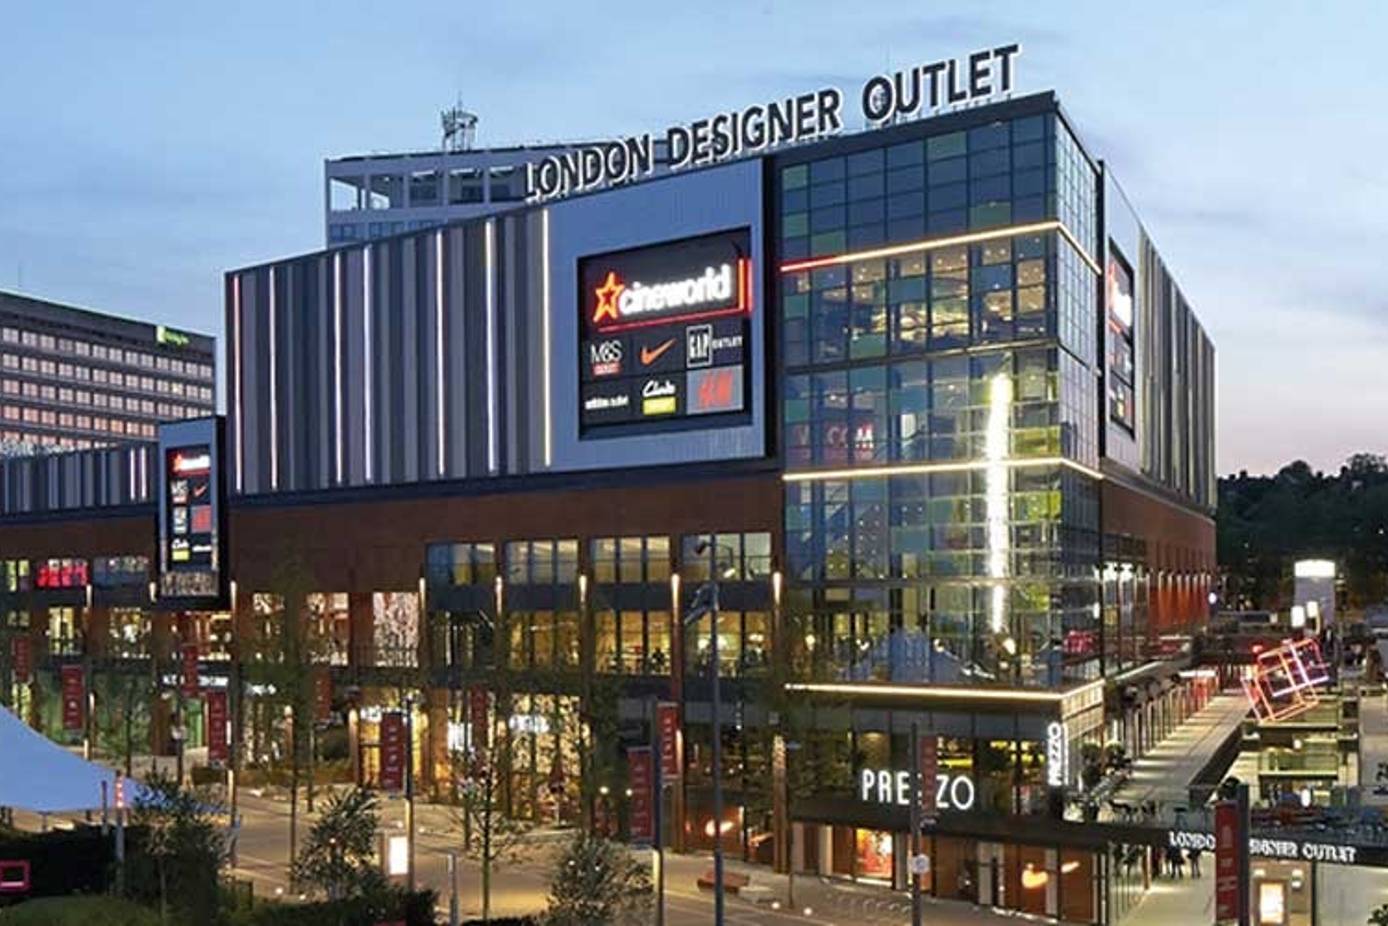 details nicotine angst Converse to open first retail store at London Designer Outlet